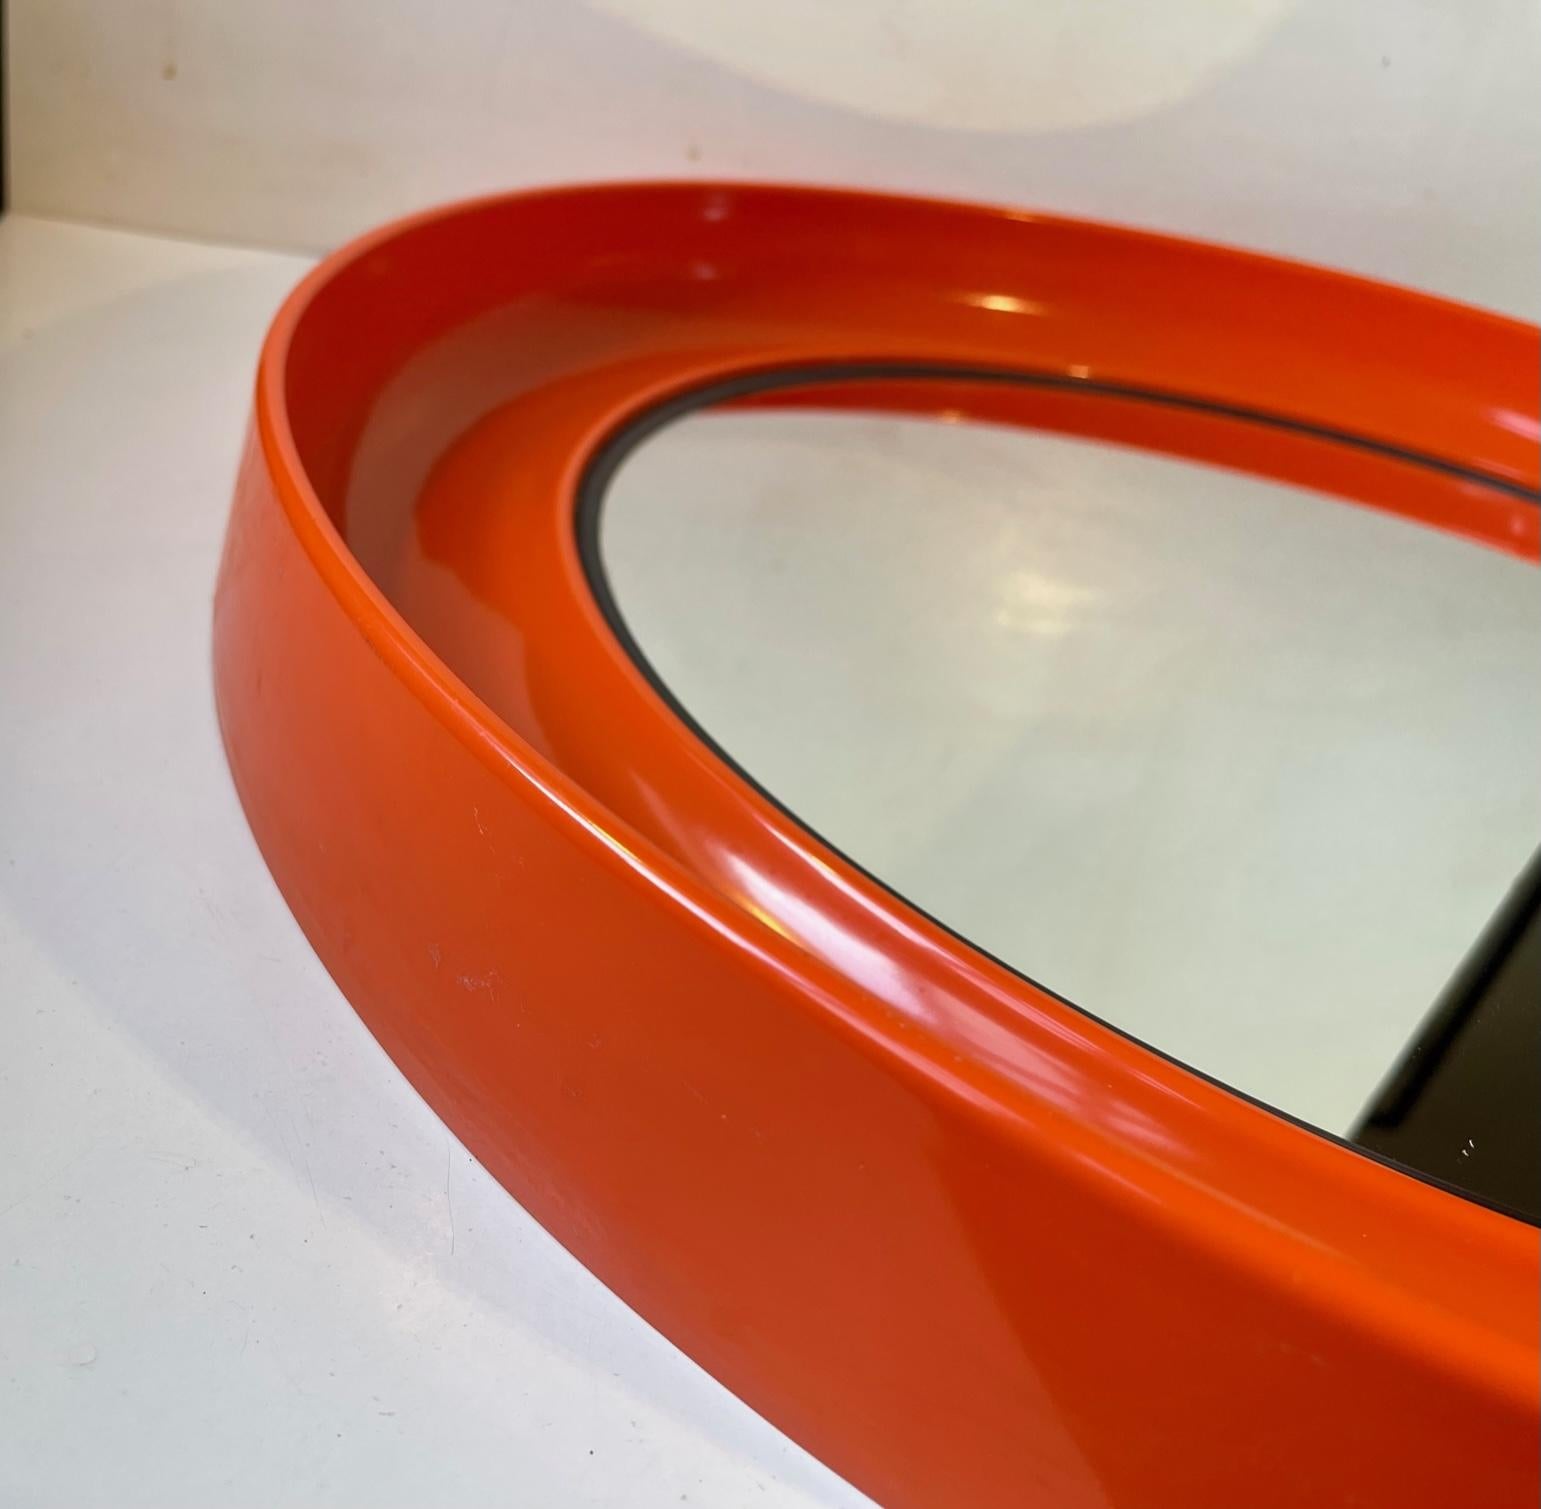 A round orange wall mirror I molded plastic. Beautiful. organic lines and curves. Manufactured in Denmark during the 1970s by Termotex. Anonymous designer. It features a hidden wall mount for a single screw. Measurements: D: 54 cm, Dept: 6 cm.